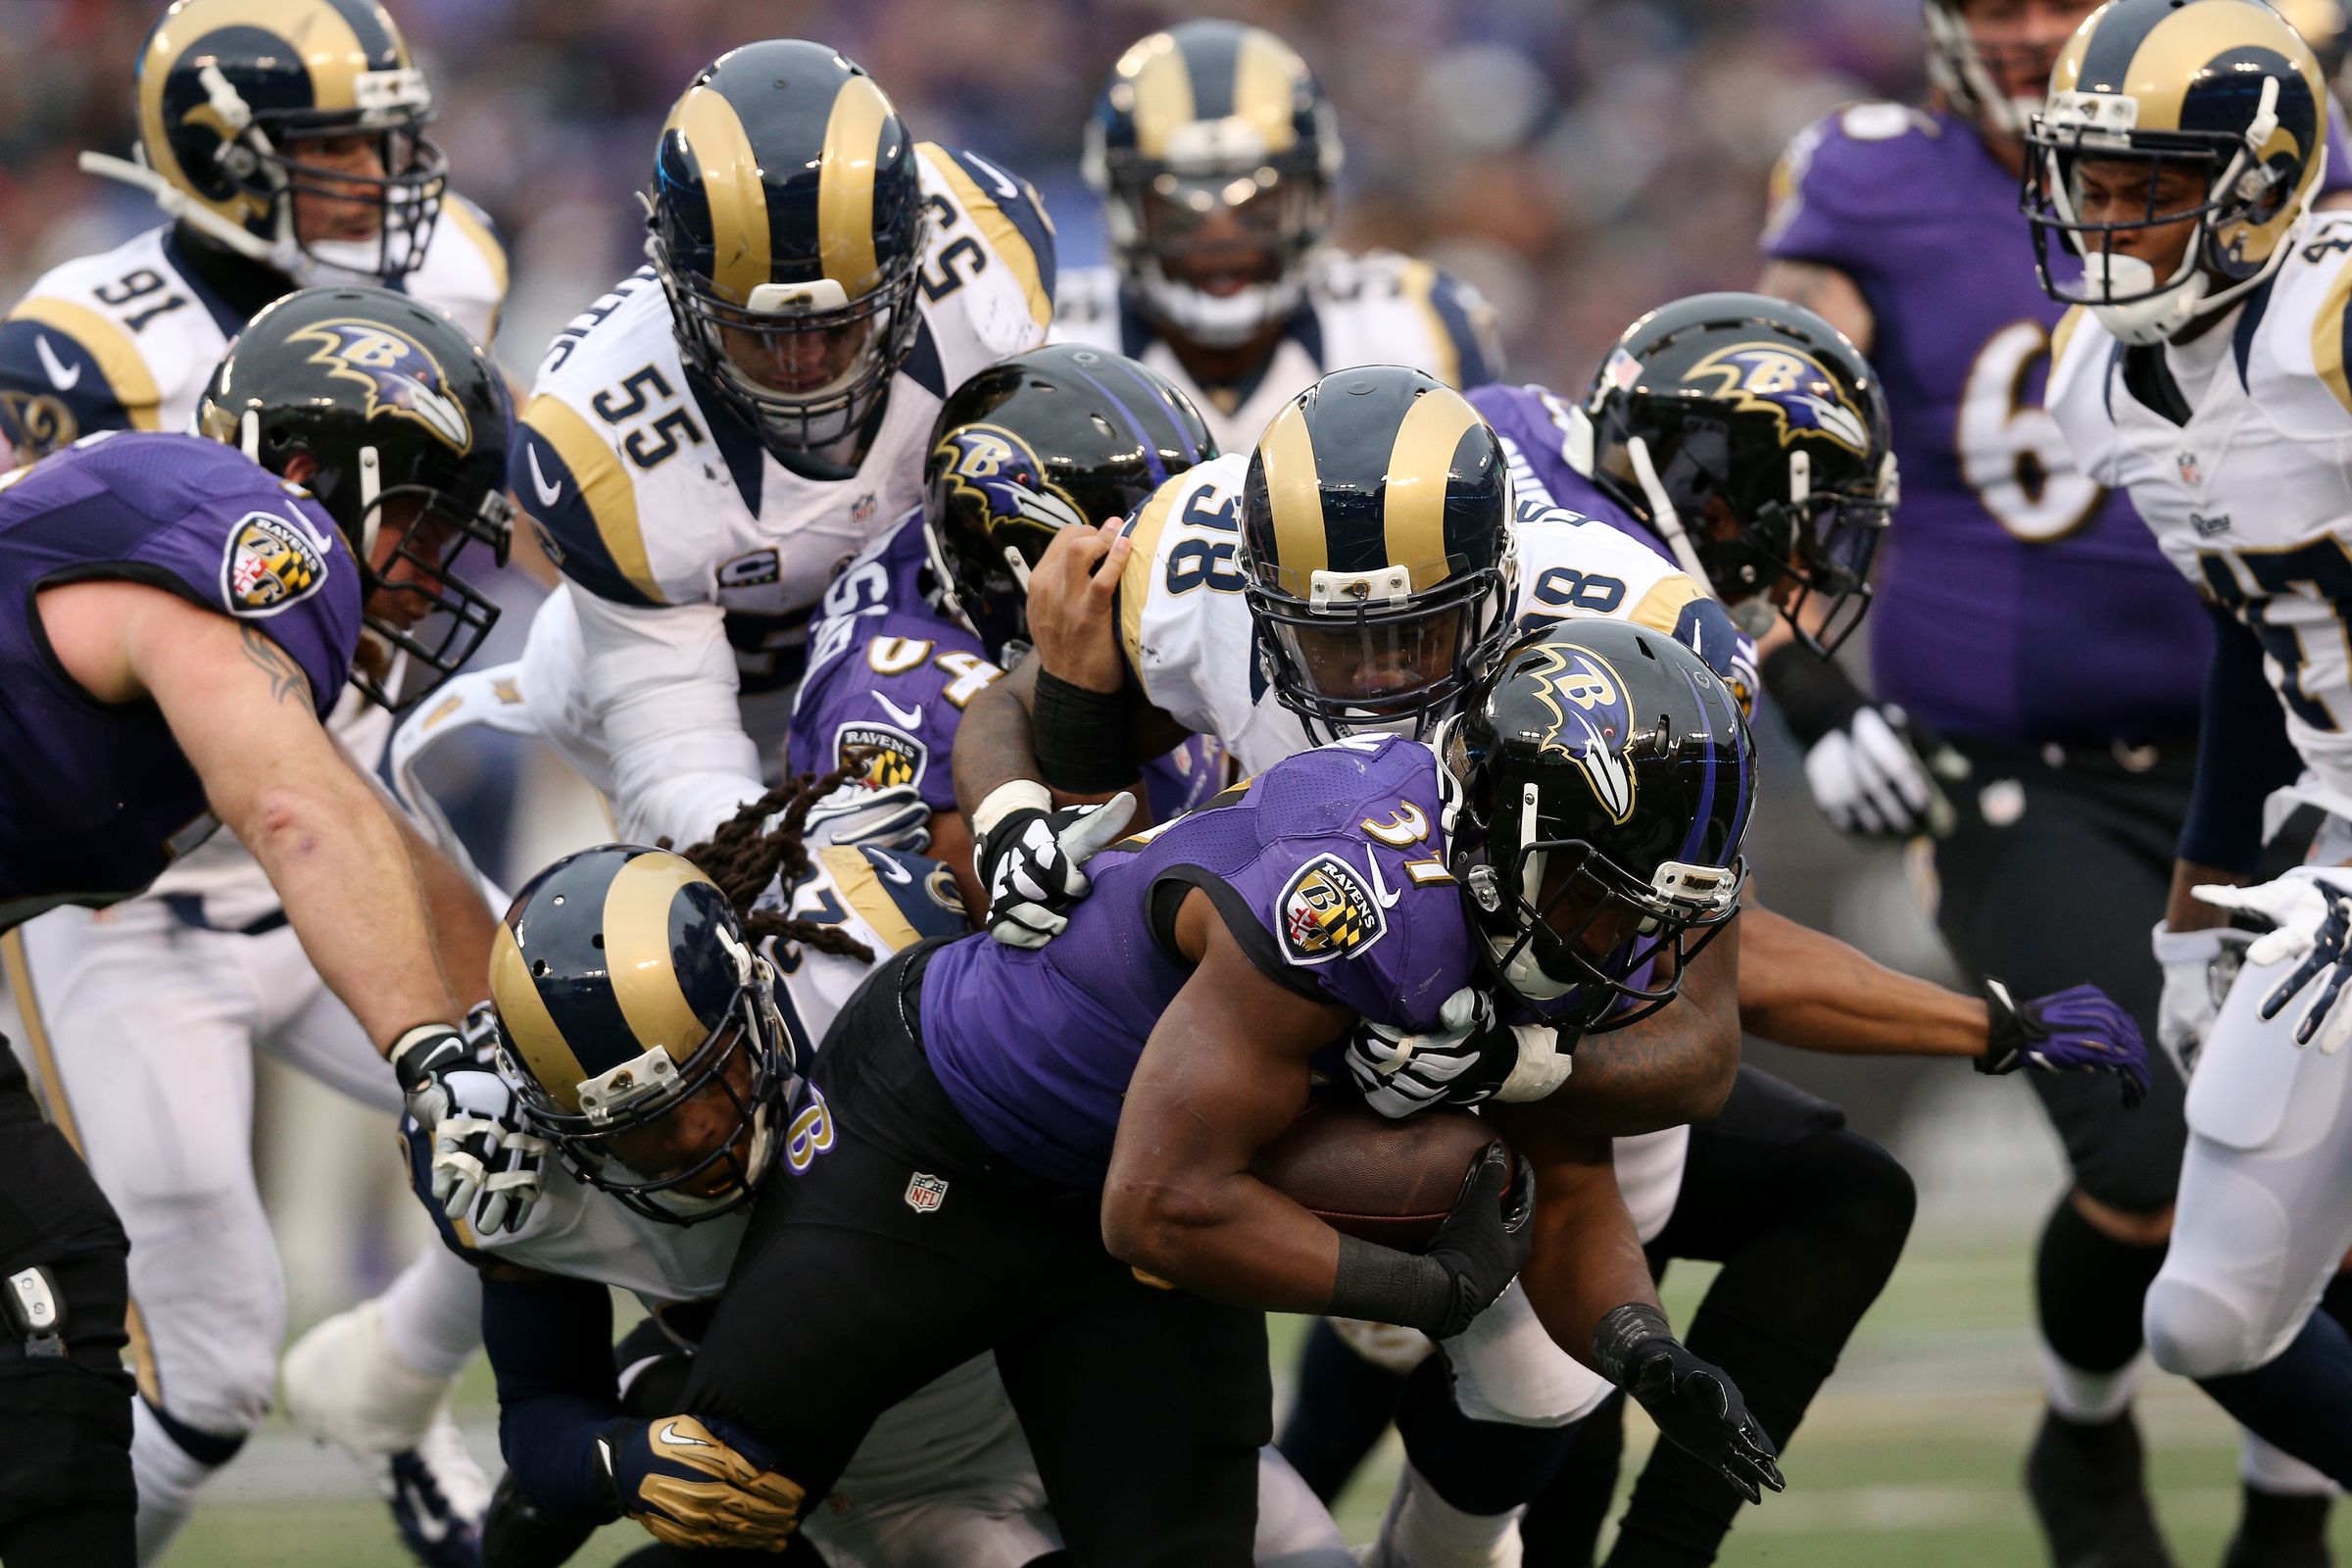 Download "Baltimore Ravens" wallpapers for mobile phone, free "Baltimore  Ravens" HD pictures